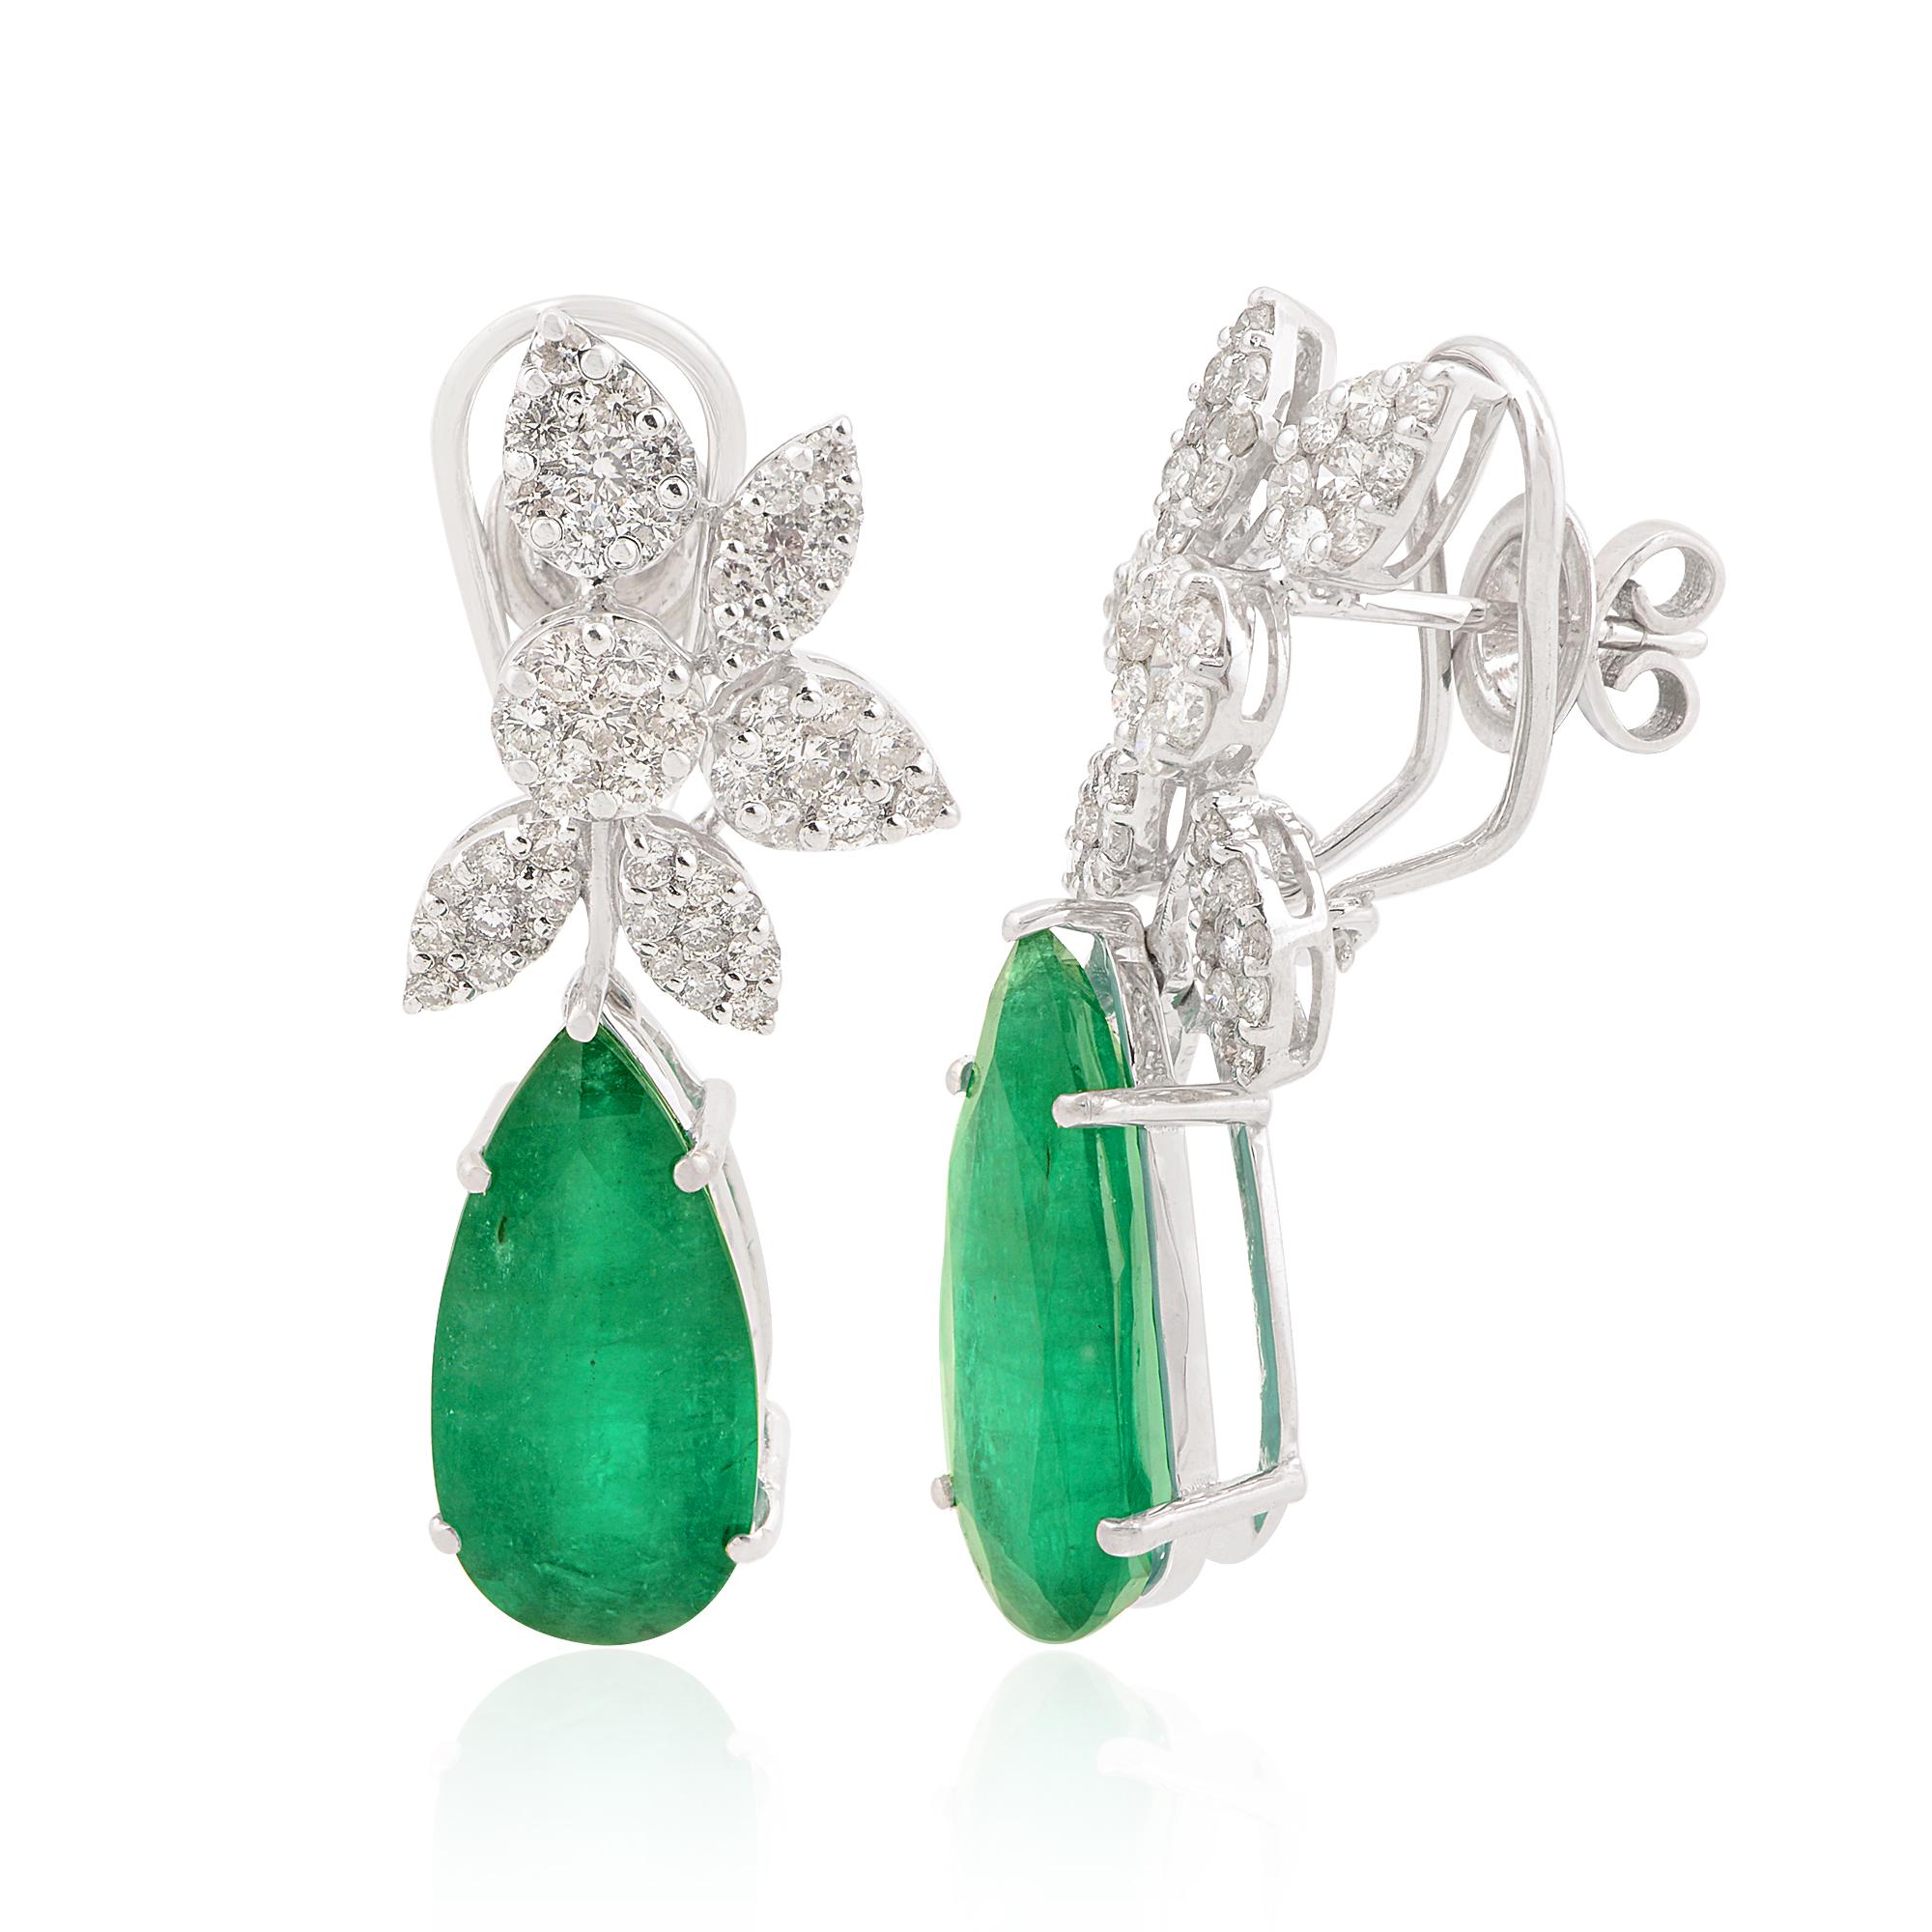 Modern Pear Natural Emerald Gemstone Leaf Earrings Diamond Pave 18k White Gold Jewelry For Sale